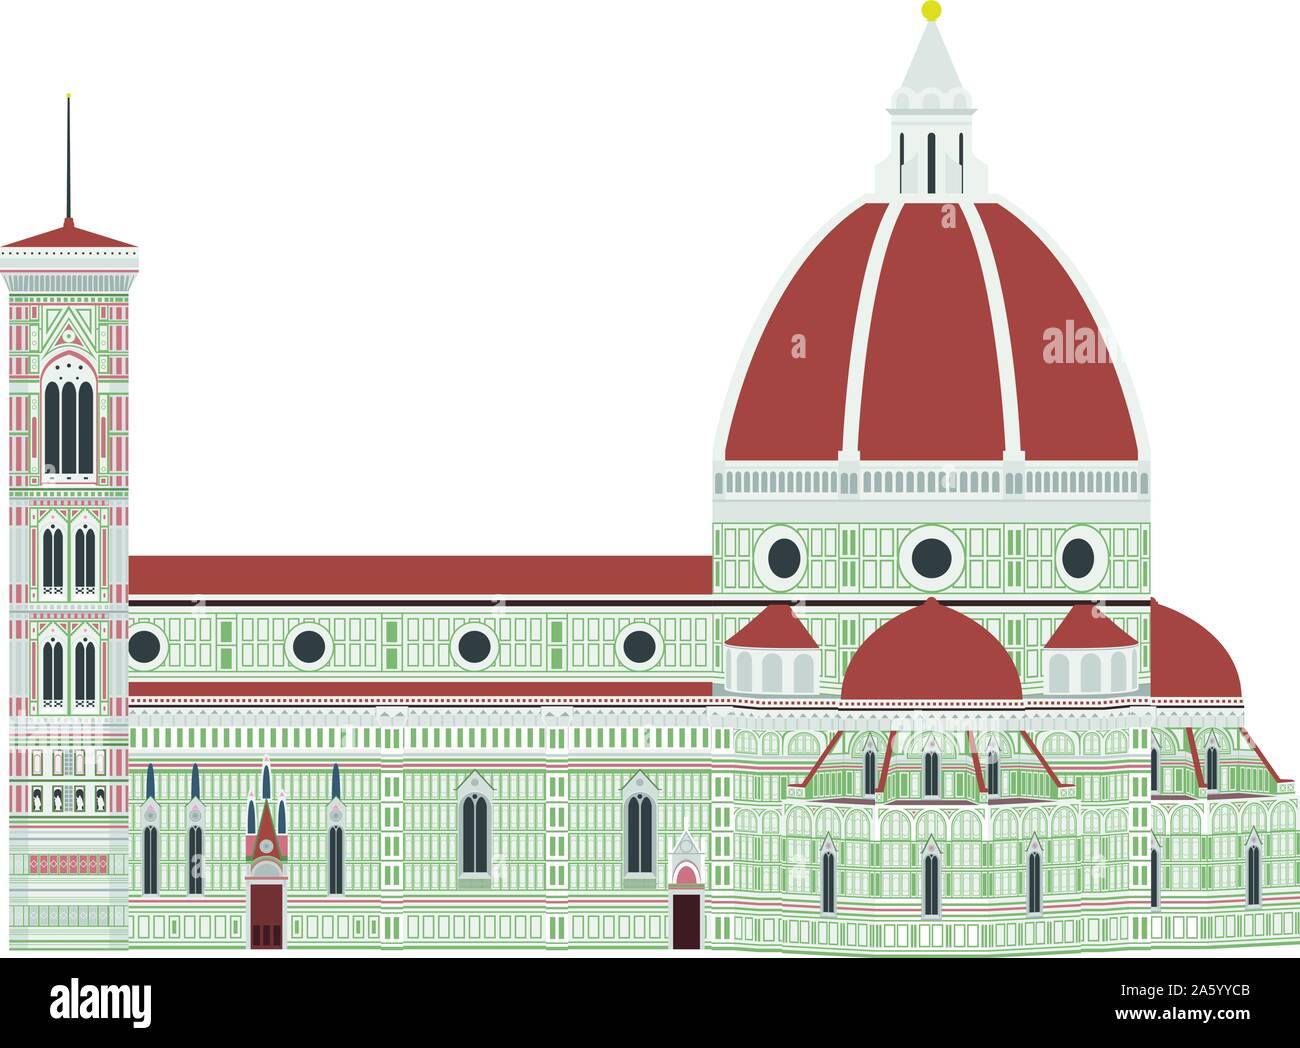 Santa Maria dei Fiore, Florence, Italy. Isolated on white background vector illustration. Stock Vector